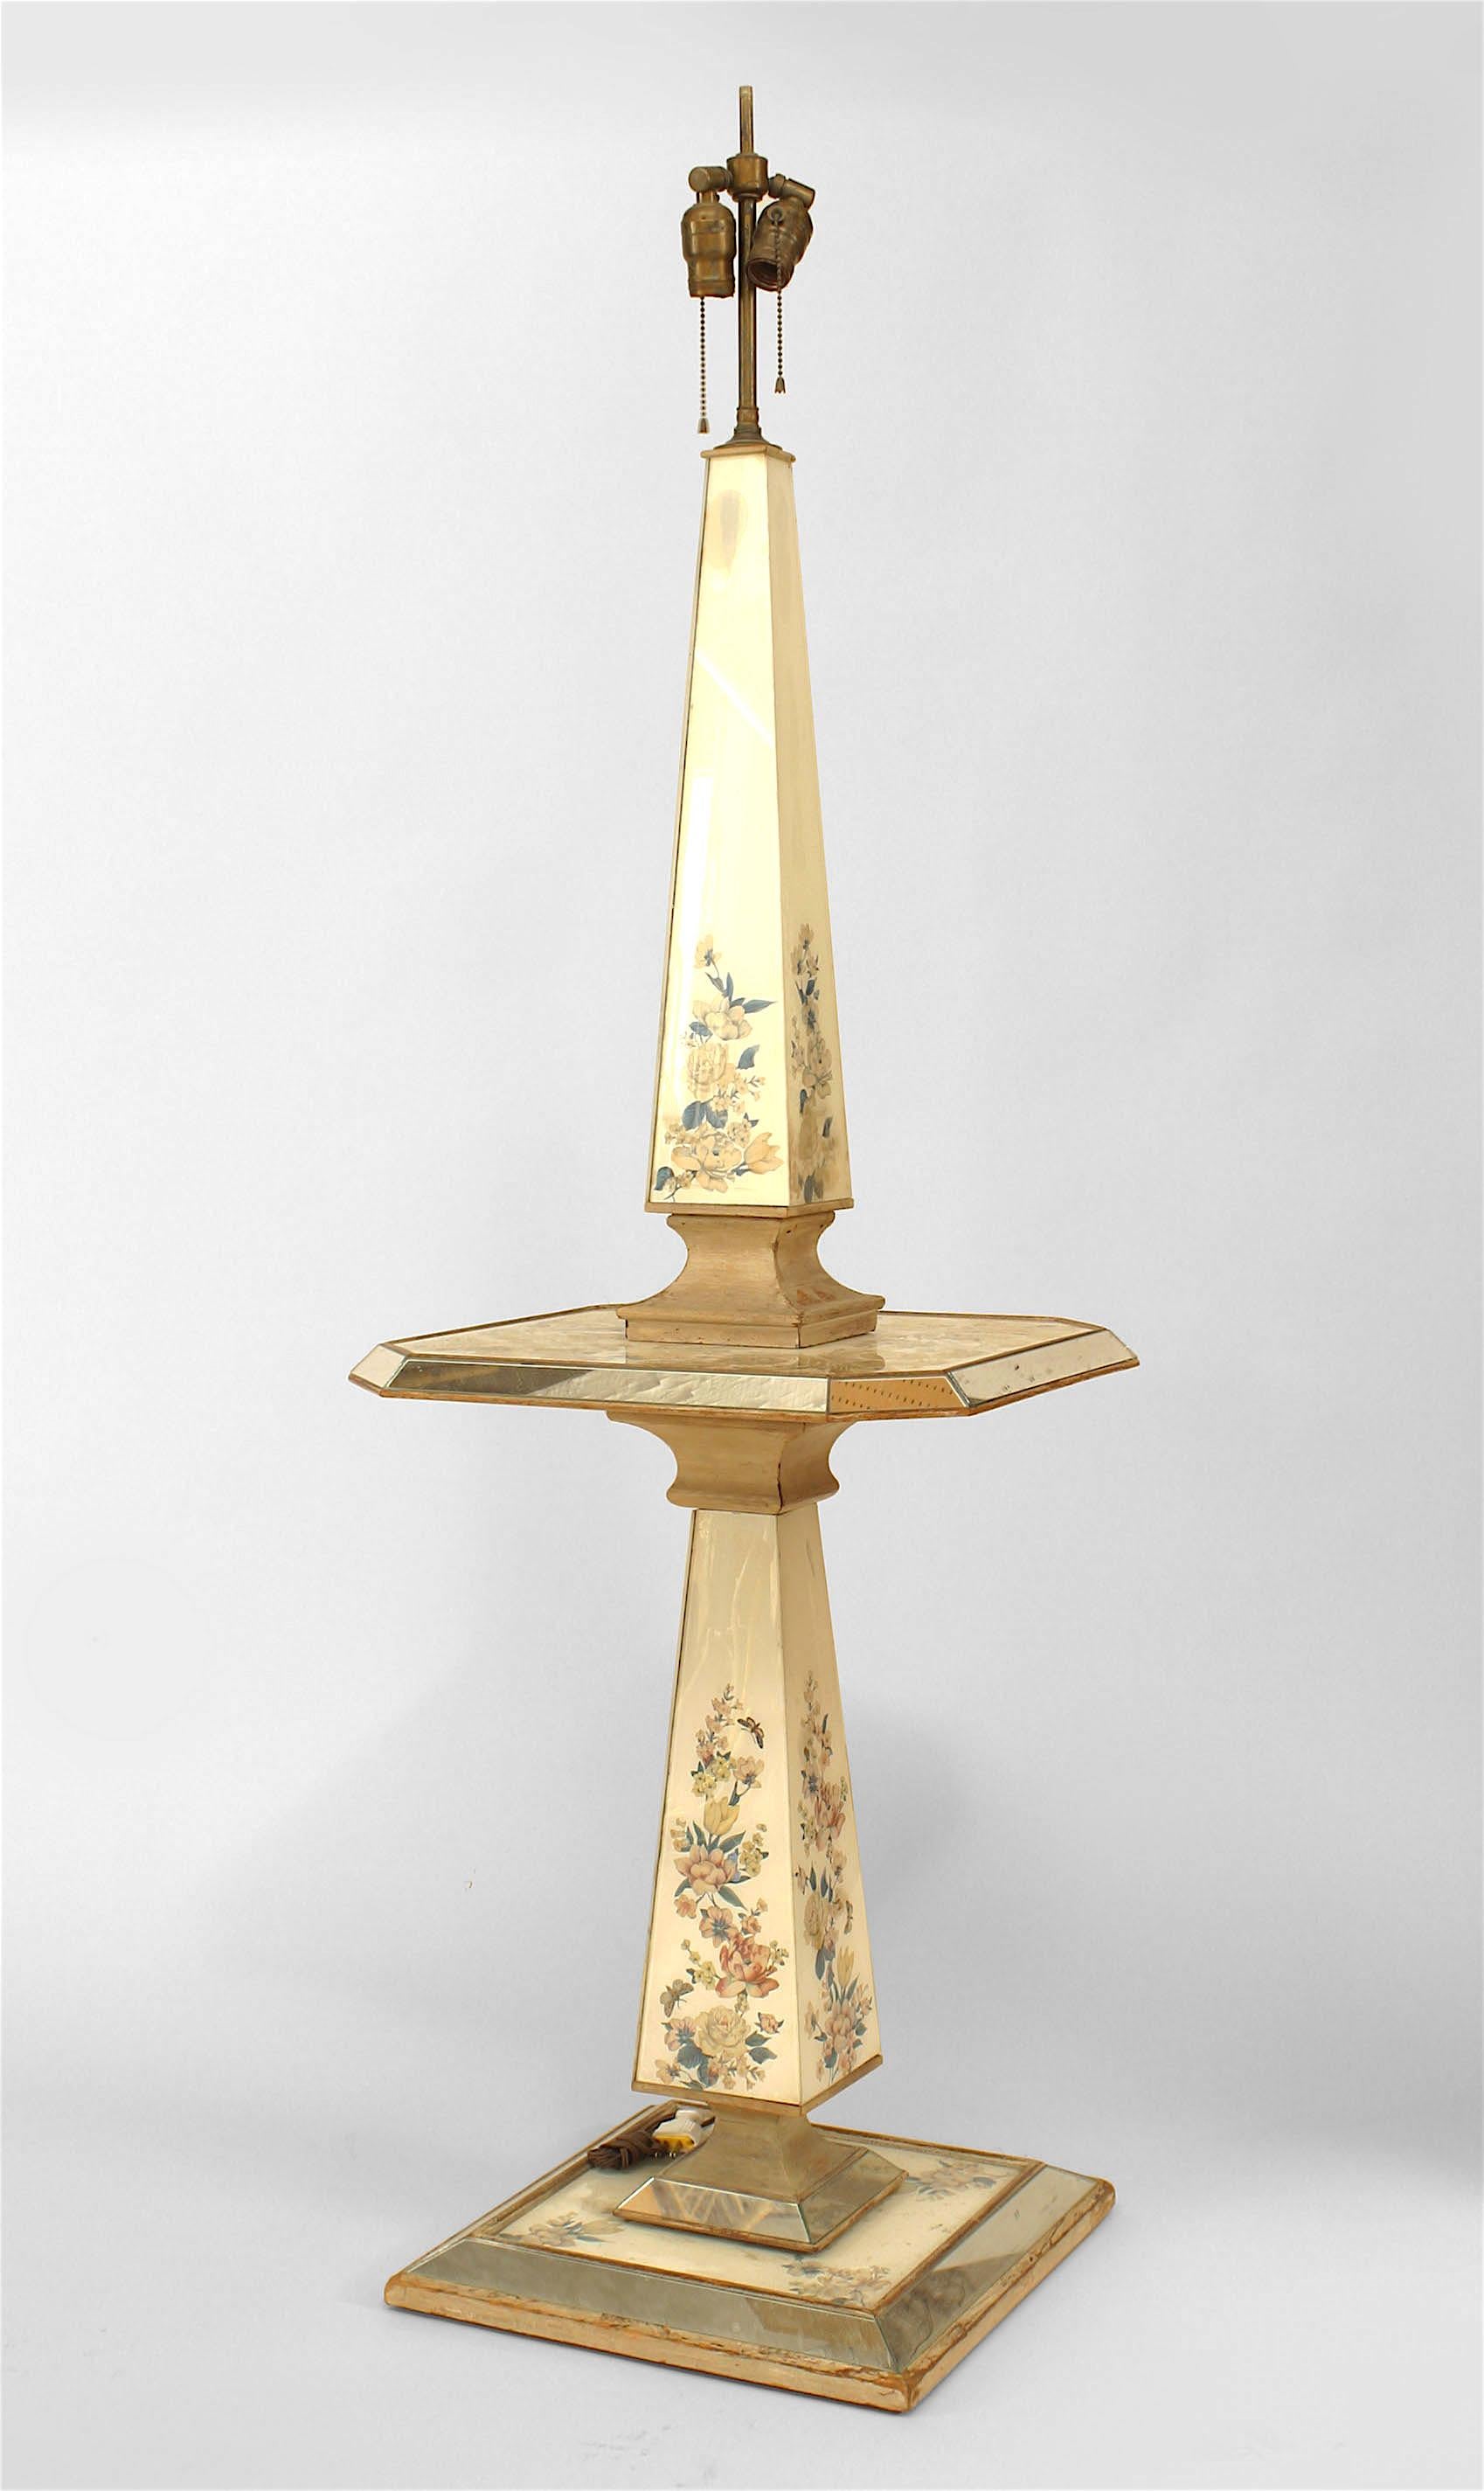 French 1940/50s two-tier floor lamp with mirrored and reverse painted obelisk columns on wood foot culminating in mirrored & reverse painted tiers with floral motif.
